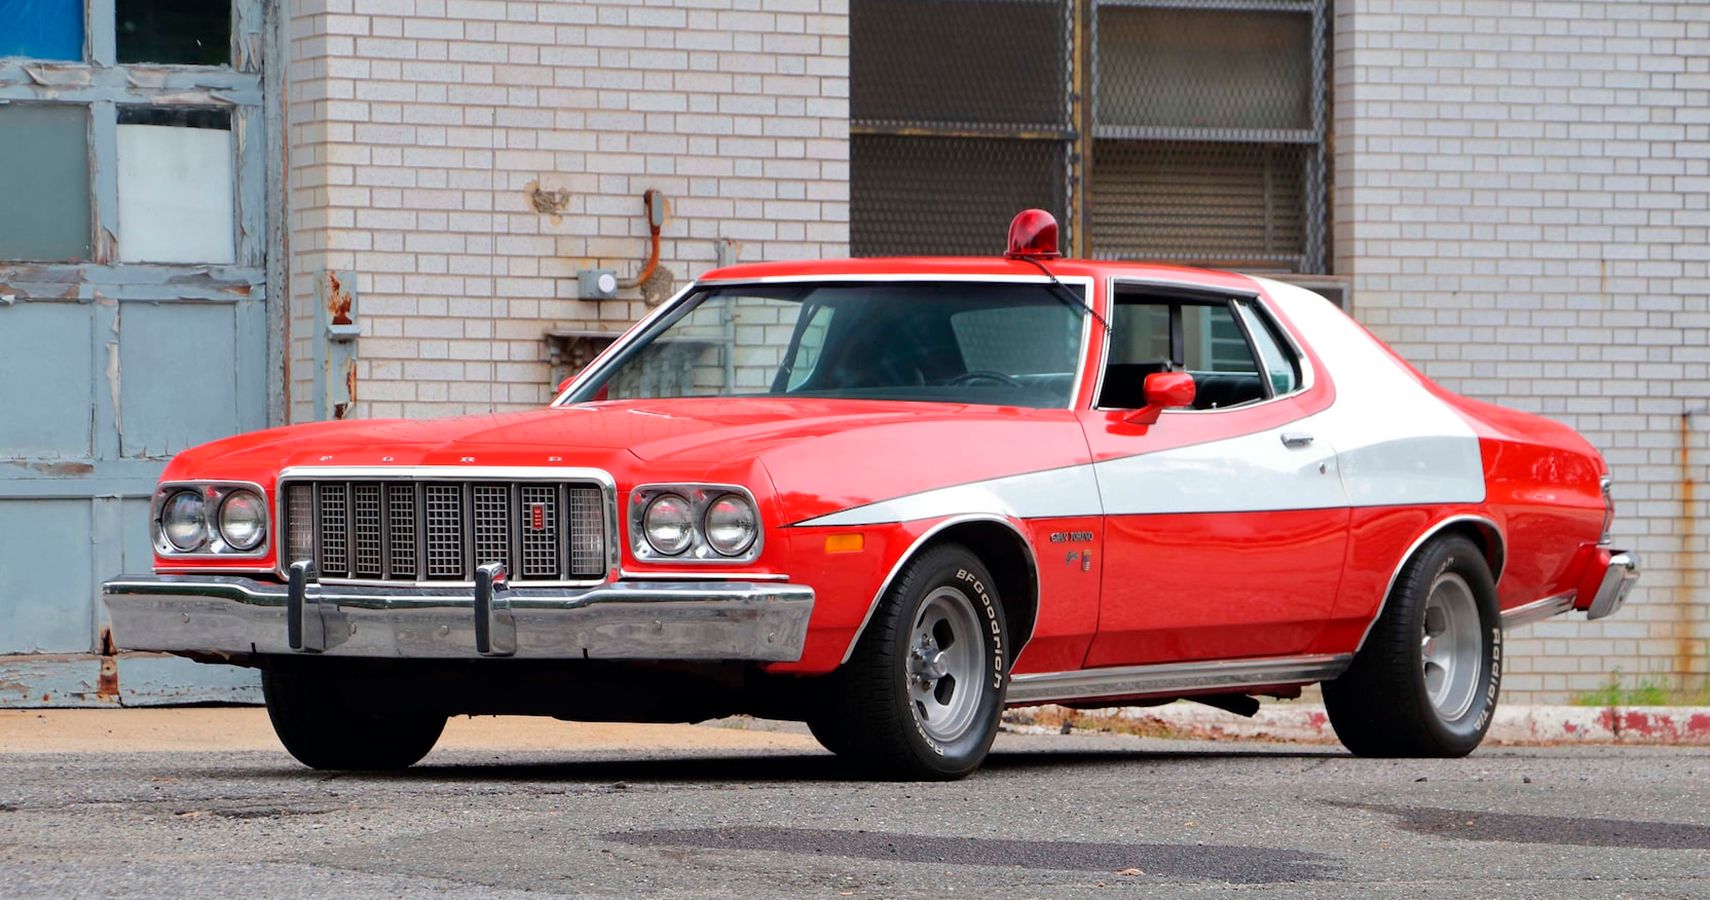 The Hero Of The TV Series Or The Movie, Starsky & Hutch, Remains The Ford Gran Torino In Unmistakable Red, Bearing That Giant, White-Wedge-Like Stripe On The Side